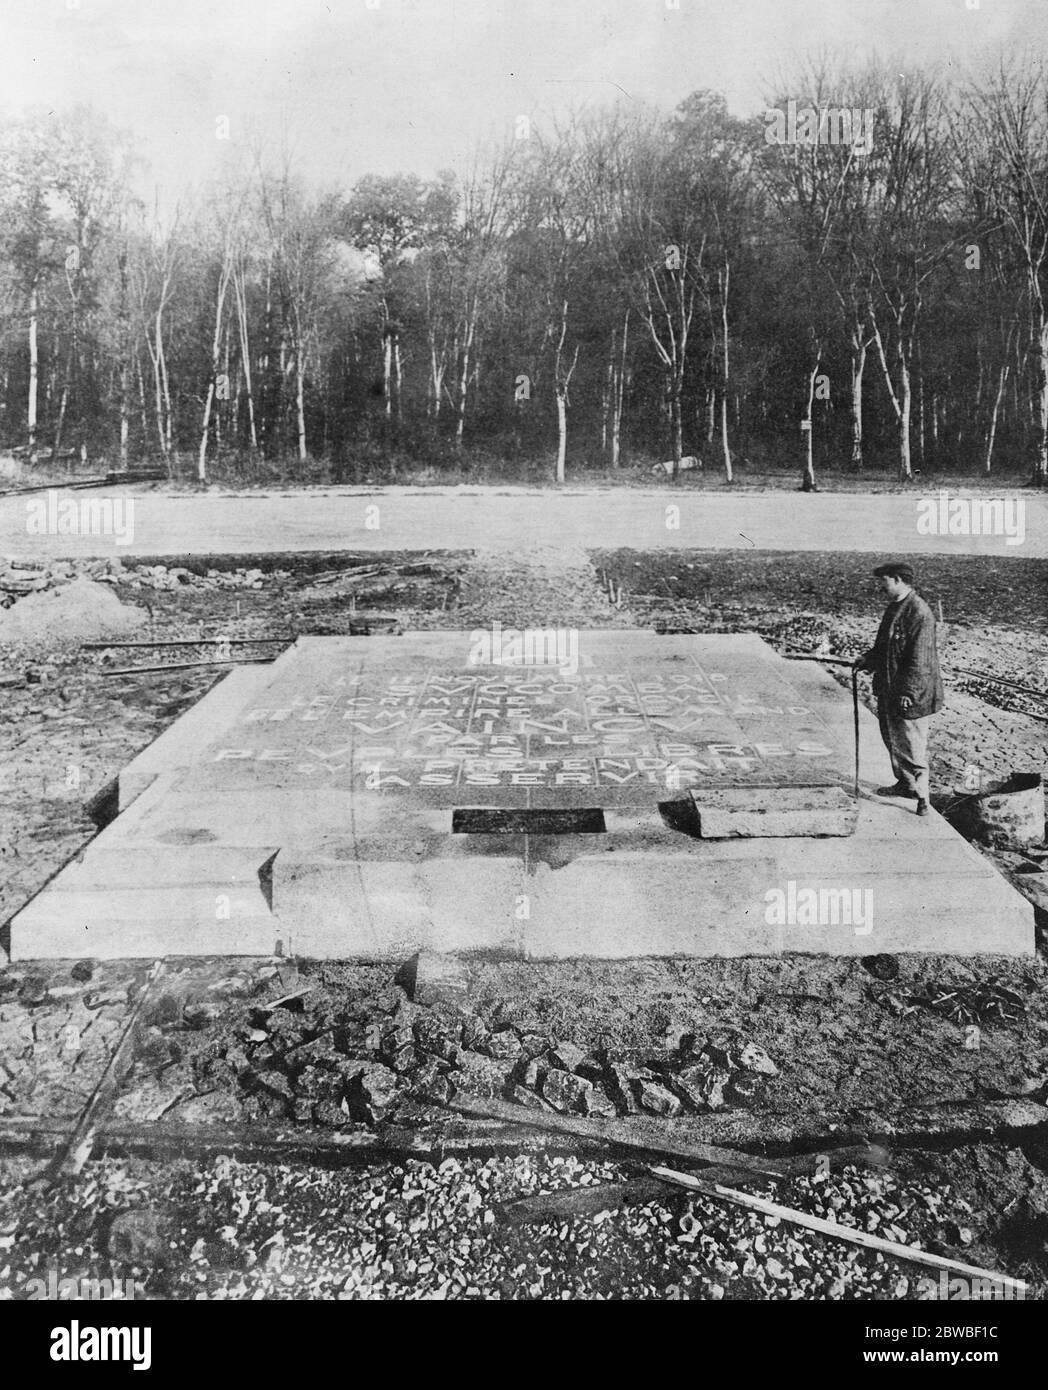 Where The Armistice Was Signed The huge granite slab which has been unveiled at Rethondes in the Forest of Compiègne in the region of Picardie, France to mark the spot on which the Armistice was signed   13 November 1922 Stock Photo